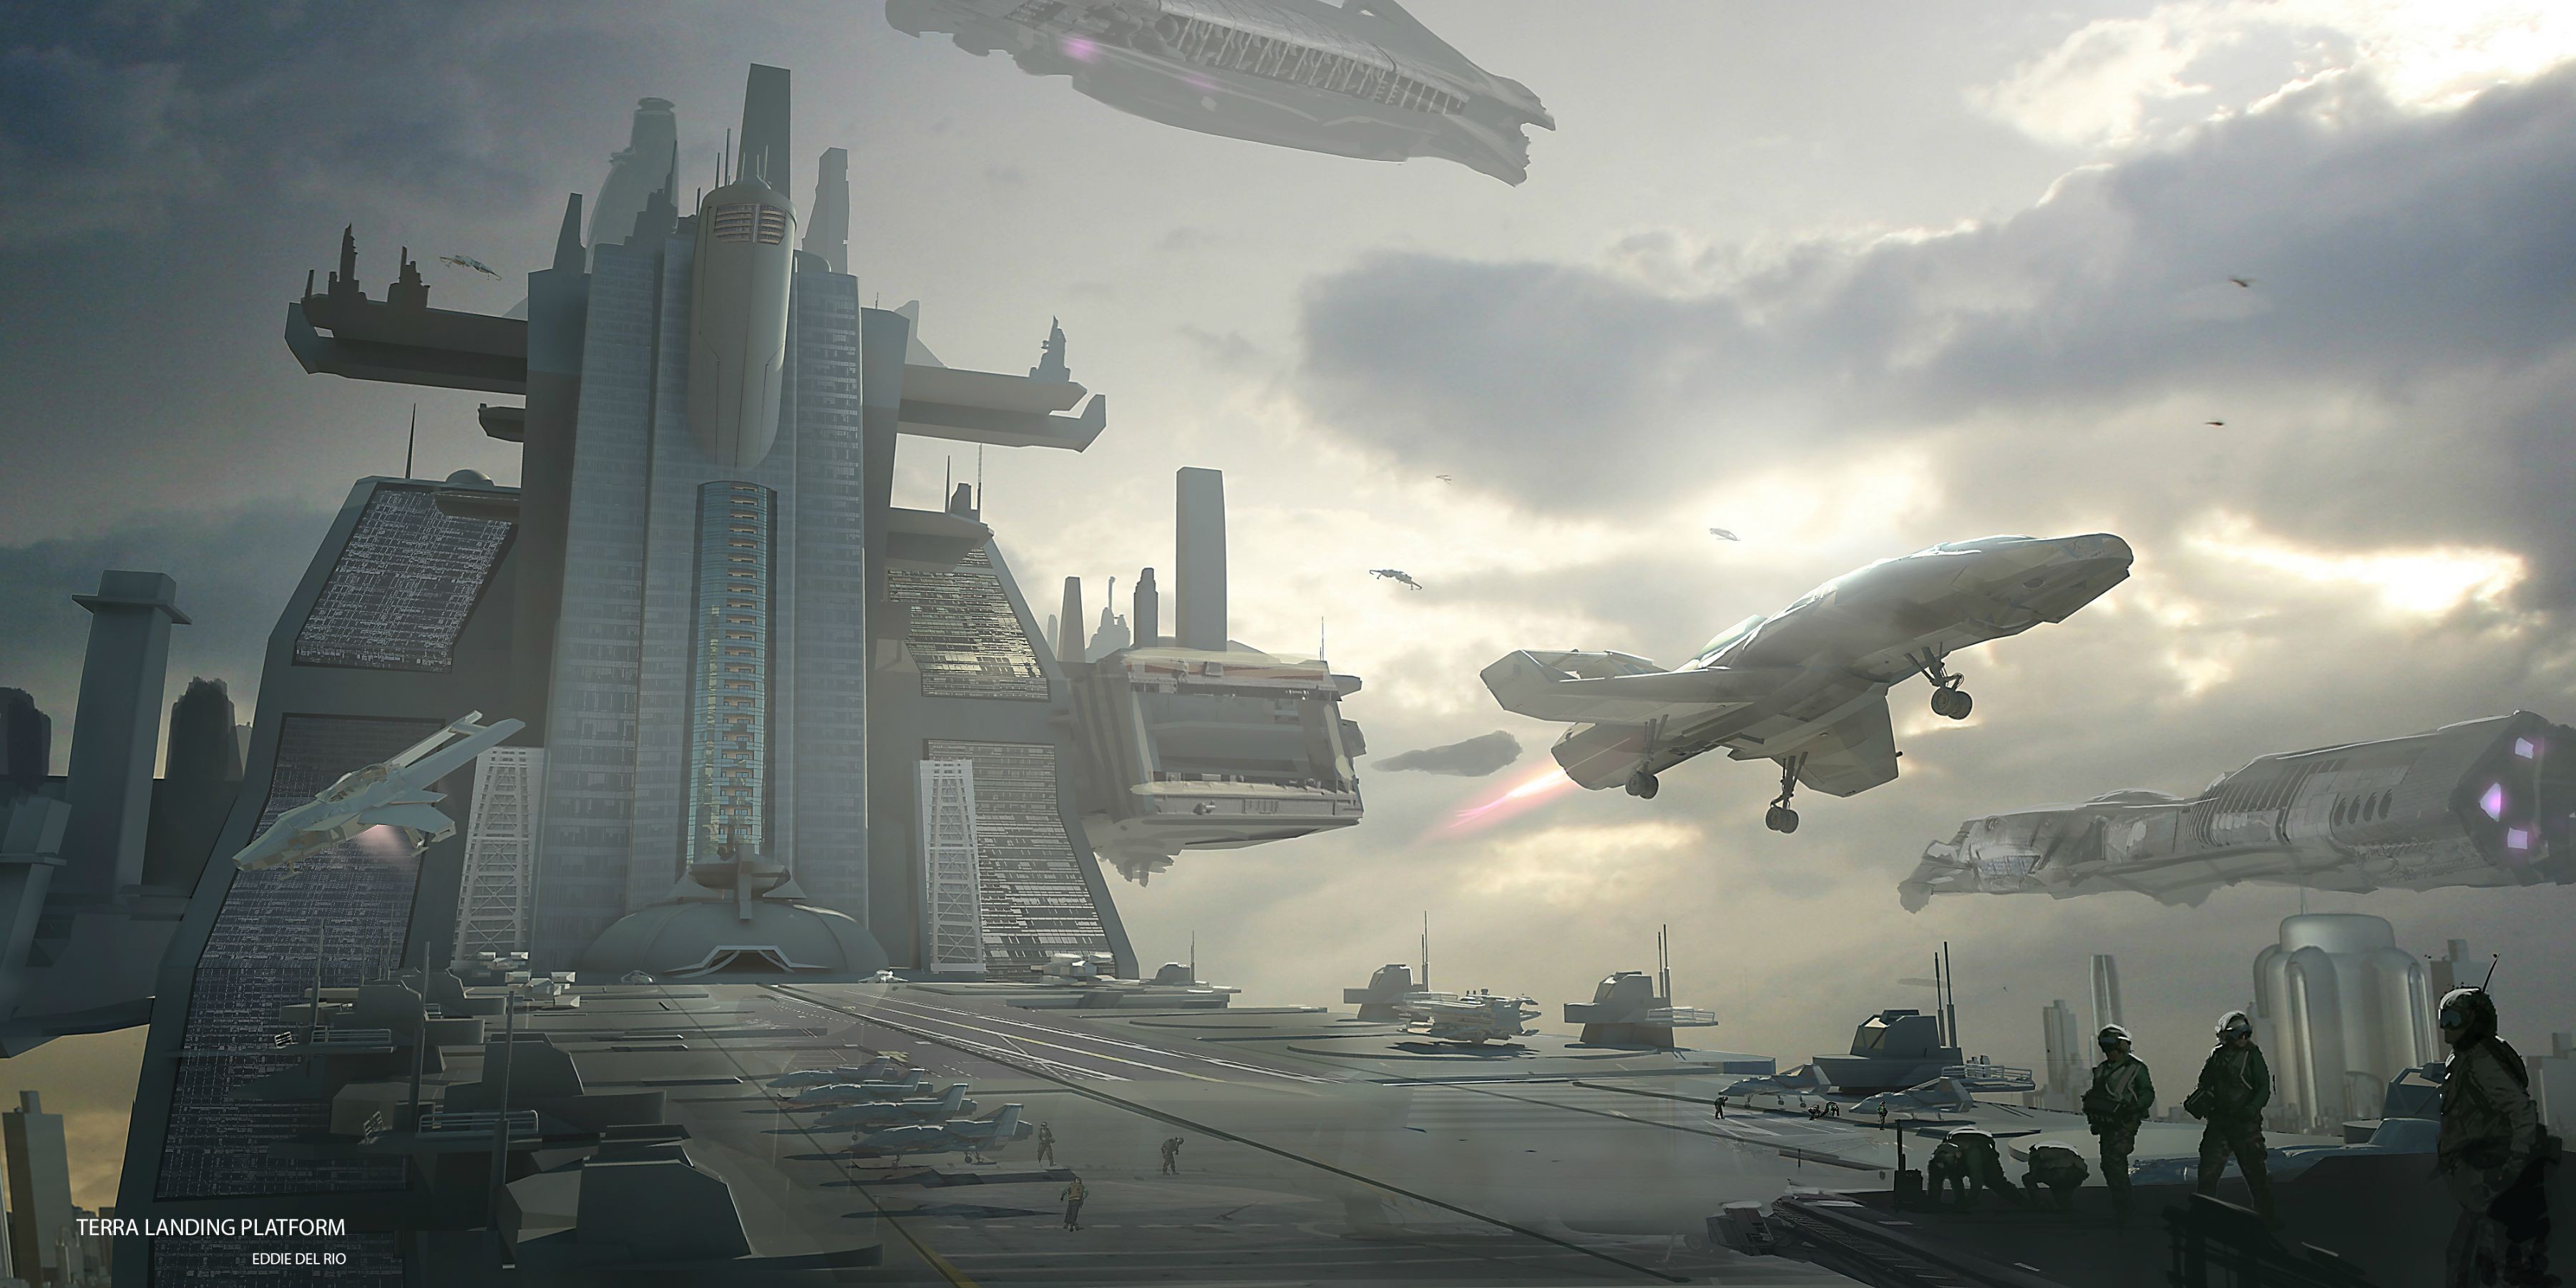 General 3600x1800 science fiction Star Citizen spaceship video games digital art PC gaming vehicle